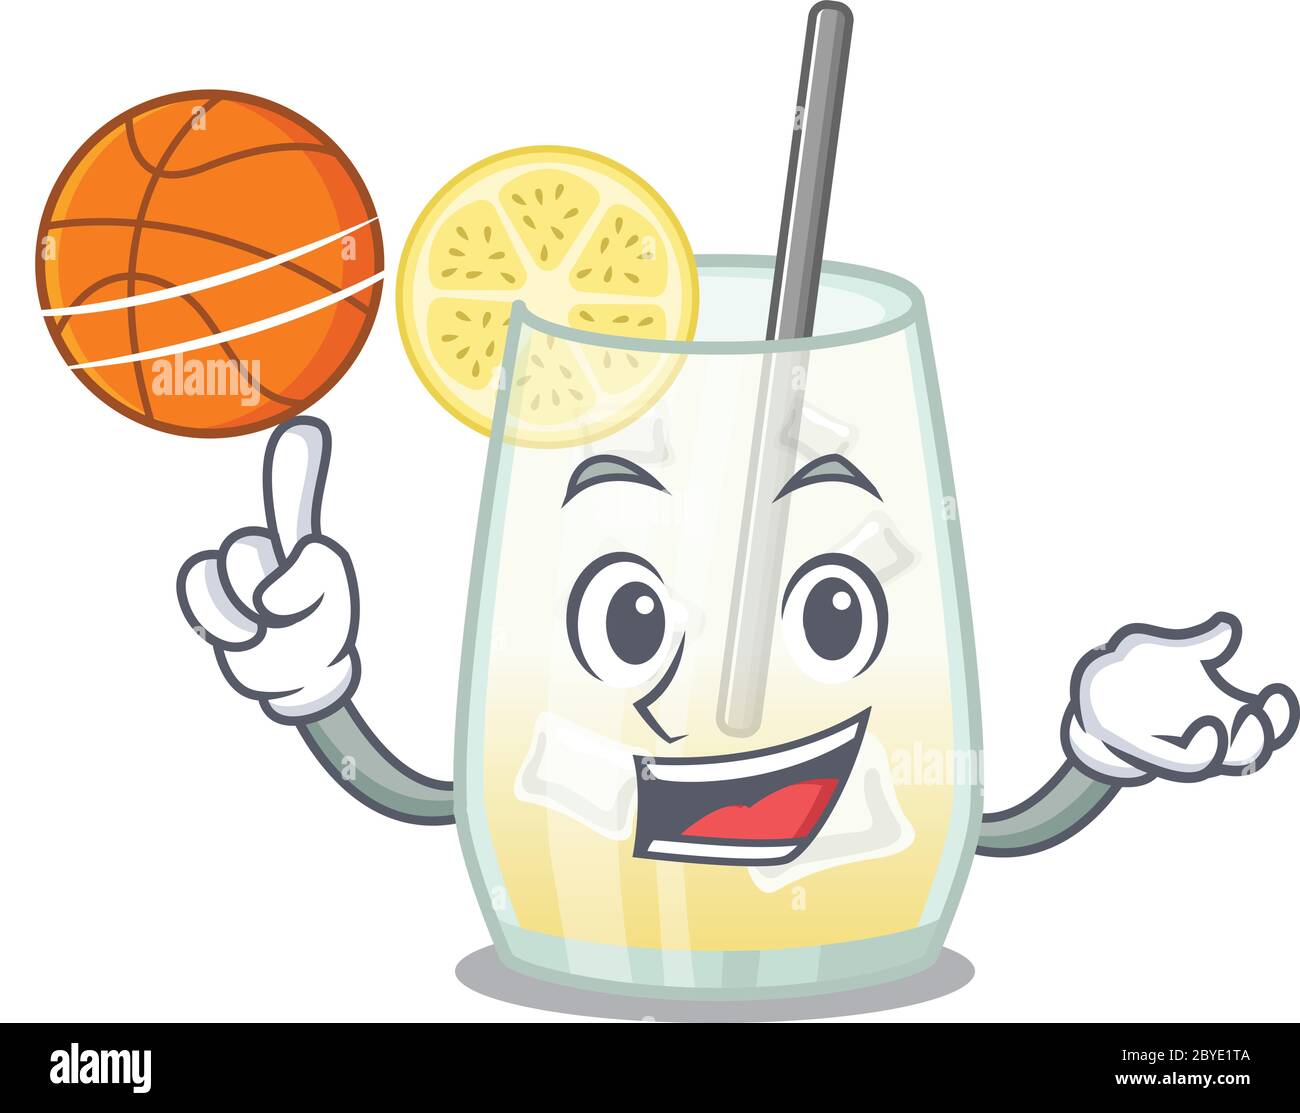 Sporty cartoon mascot design of tom collins cocktail with basketball Stock Vector